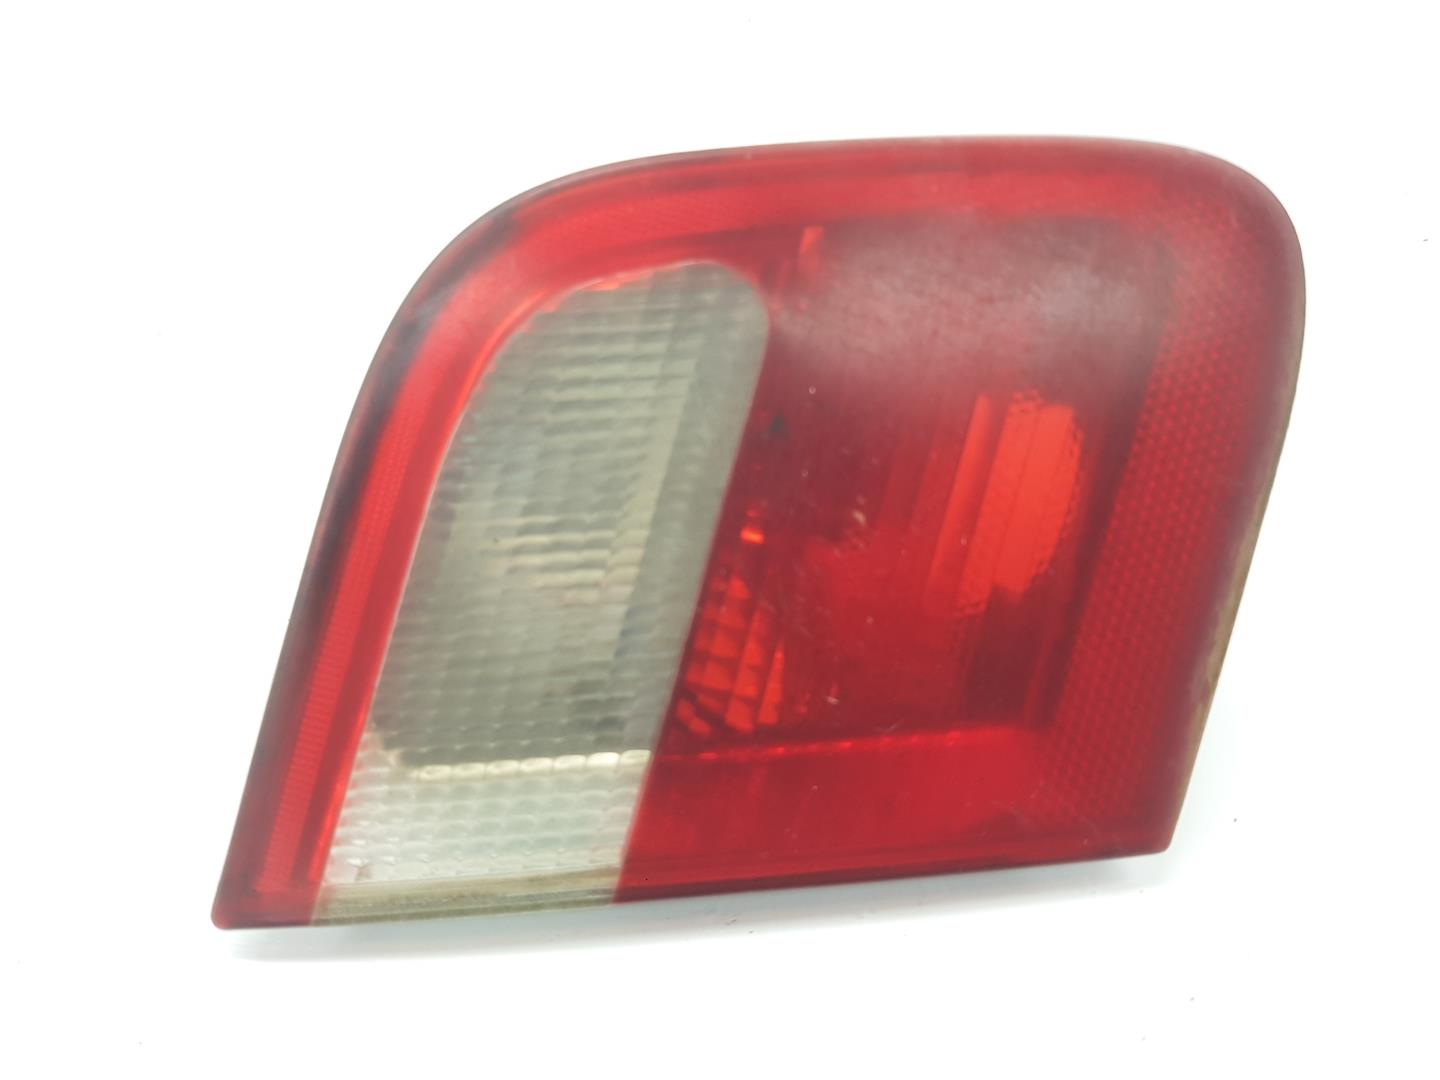 BMW 3 Series E46 (1997-2006) Rear Left Taillight 63218364923, 63218364923 24136533